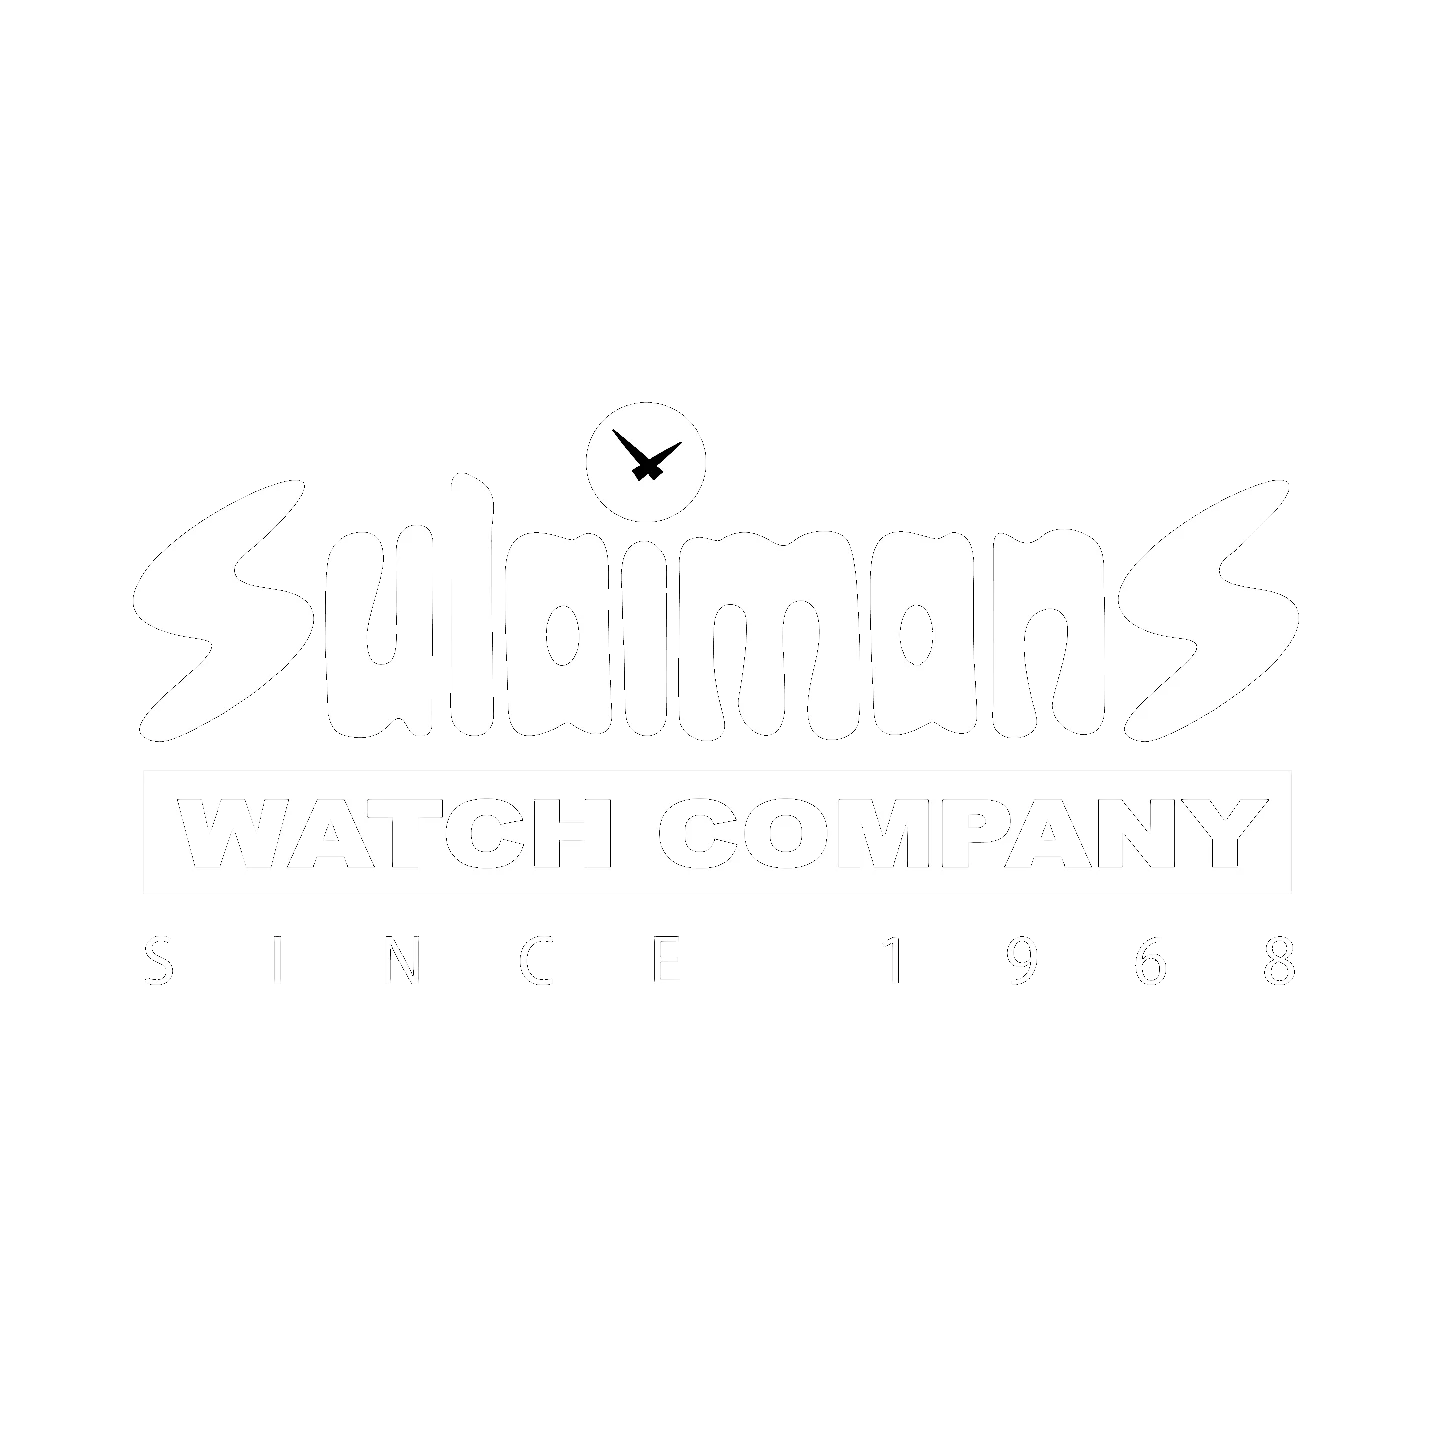 Sulaimans Watch Company